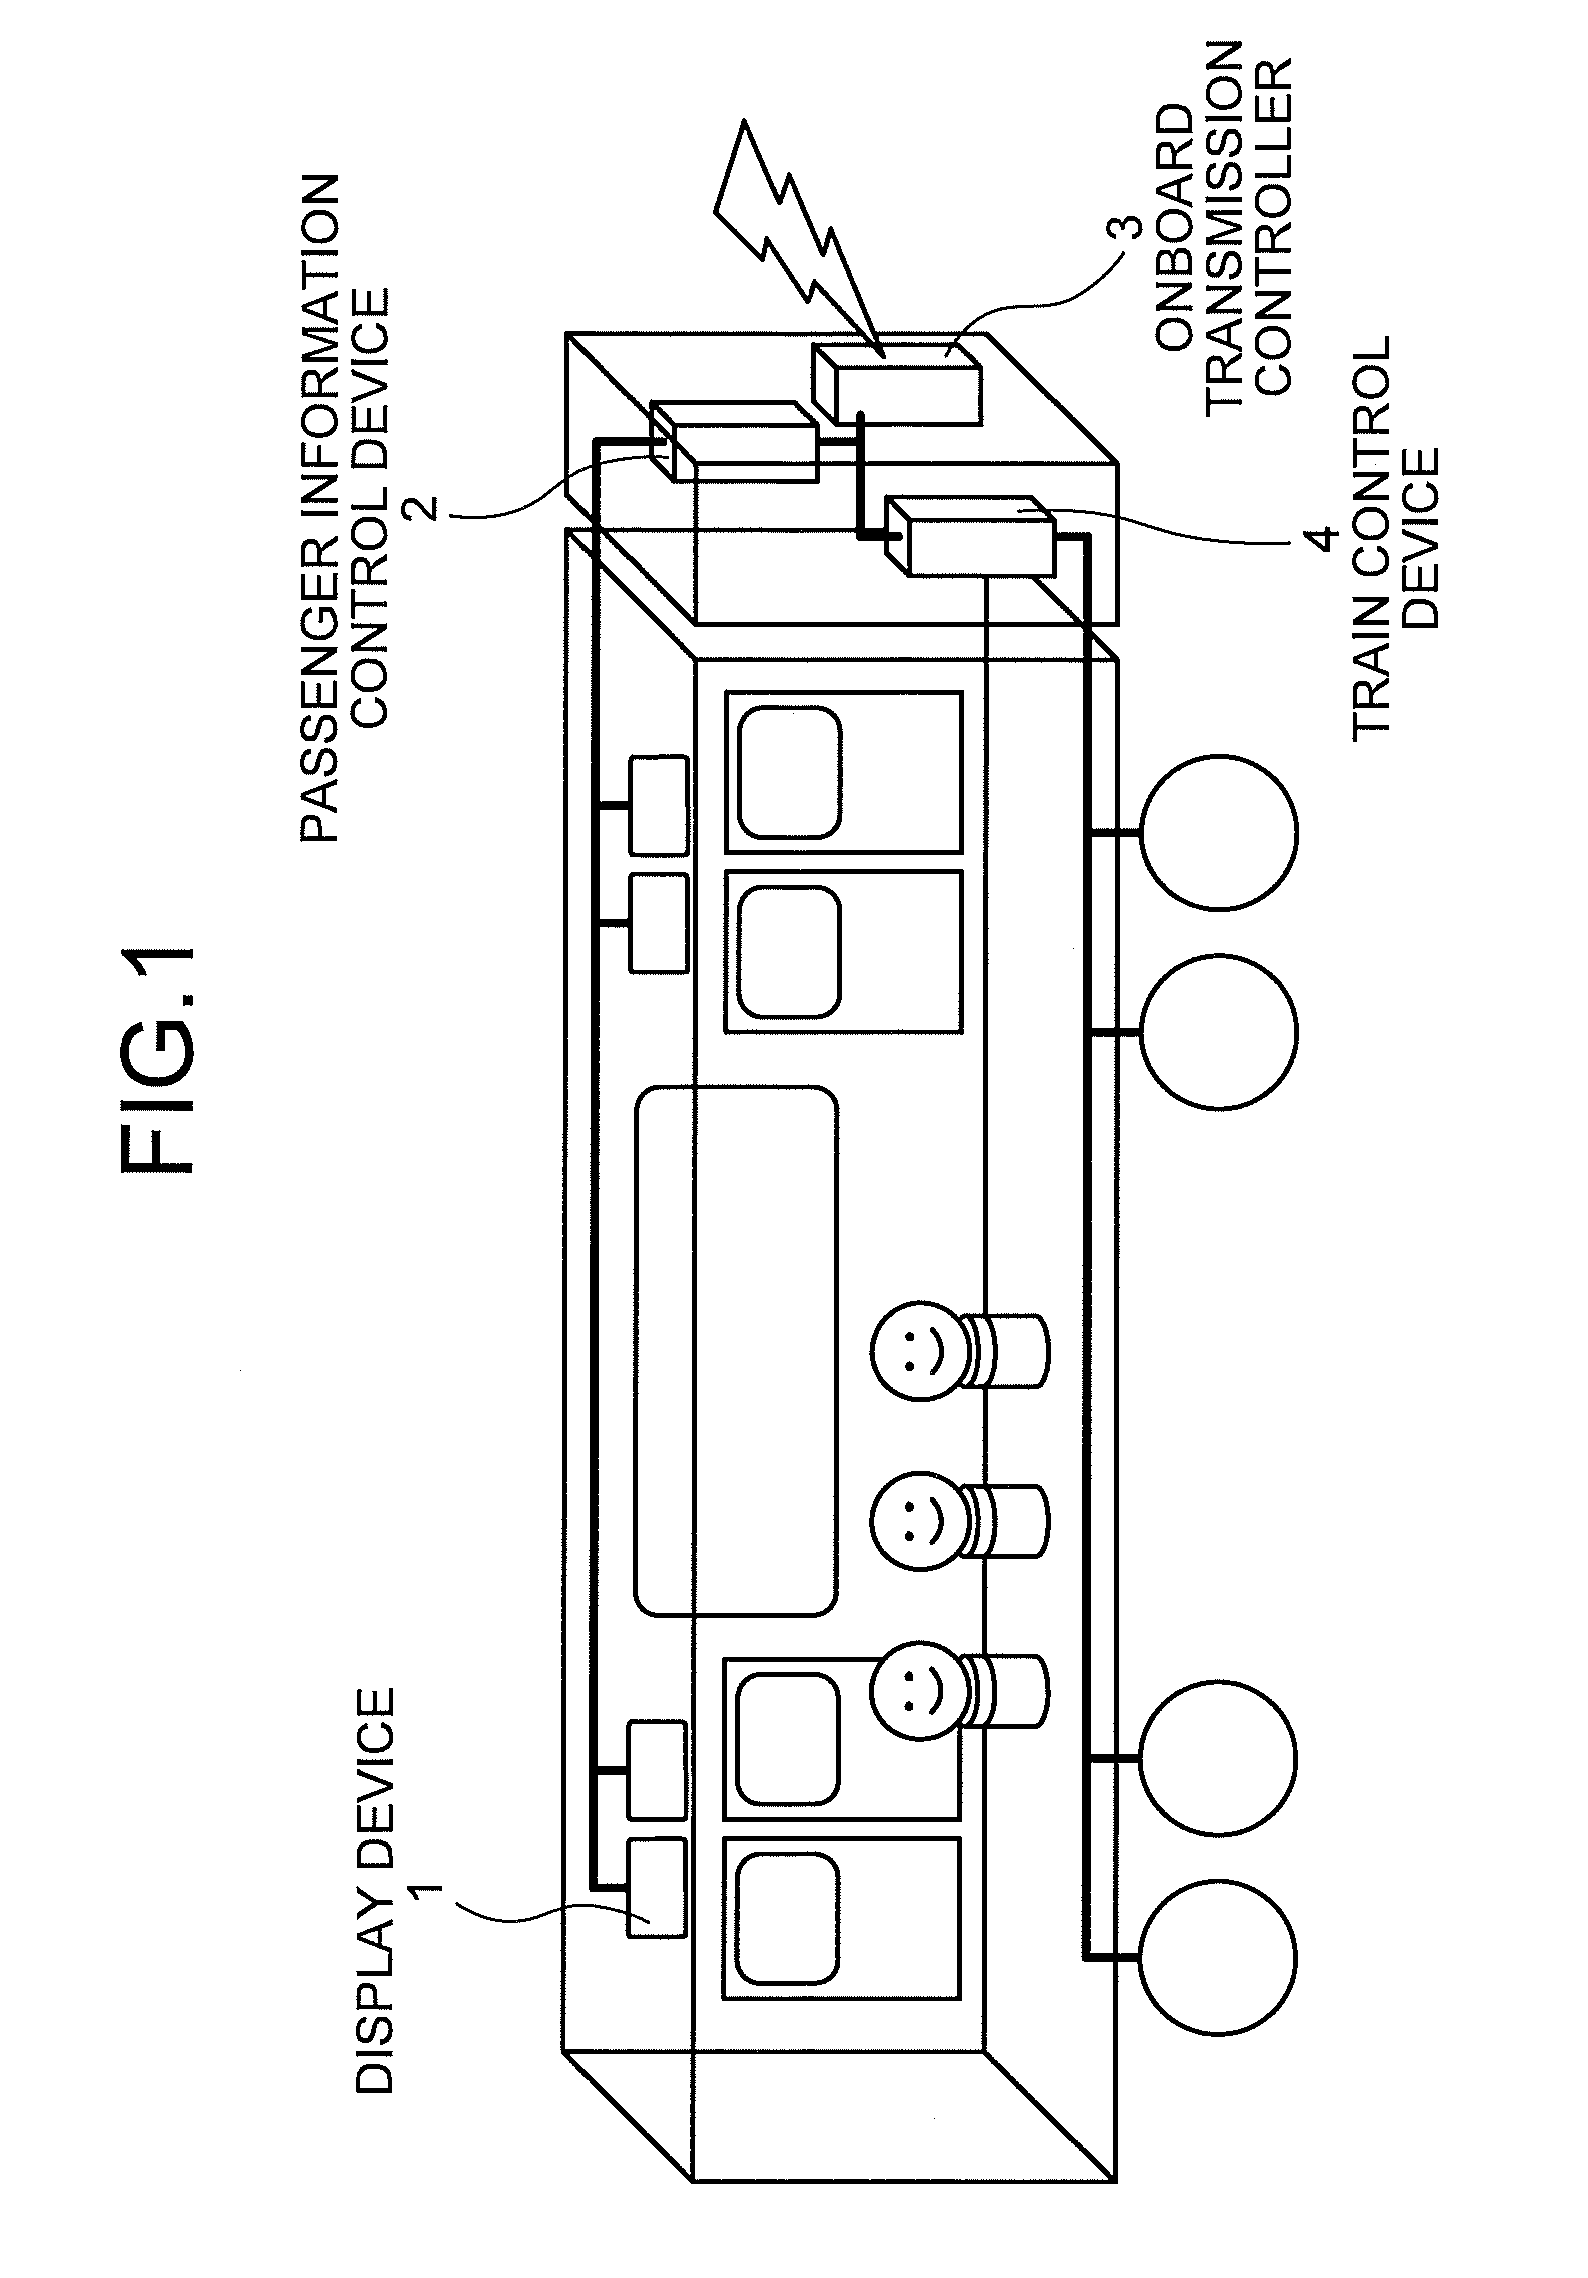 Passenger information control device and method for providing video data for passenger information control device